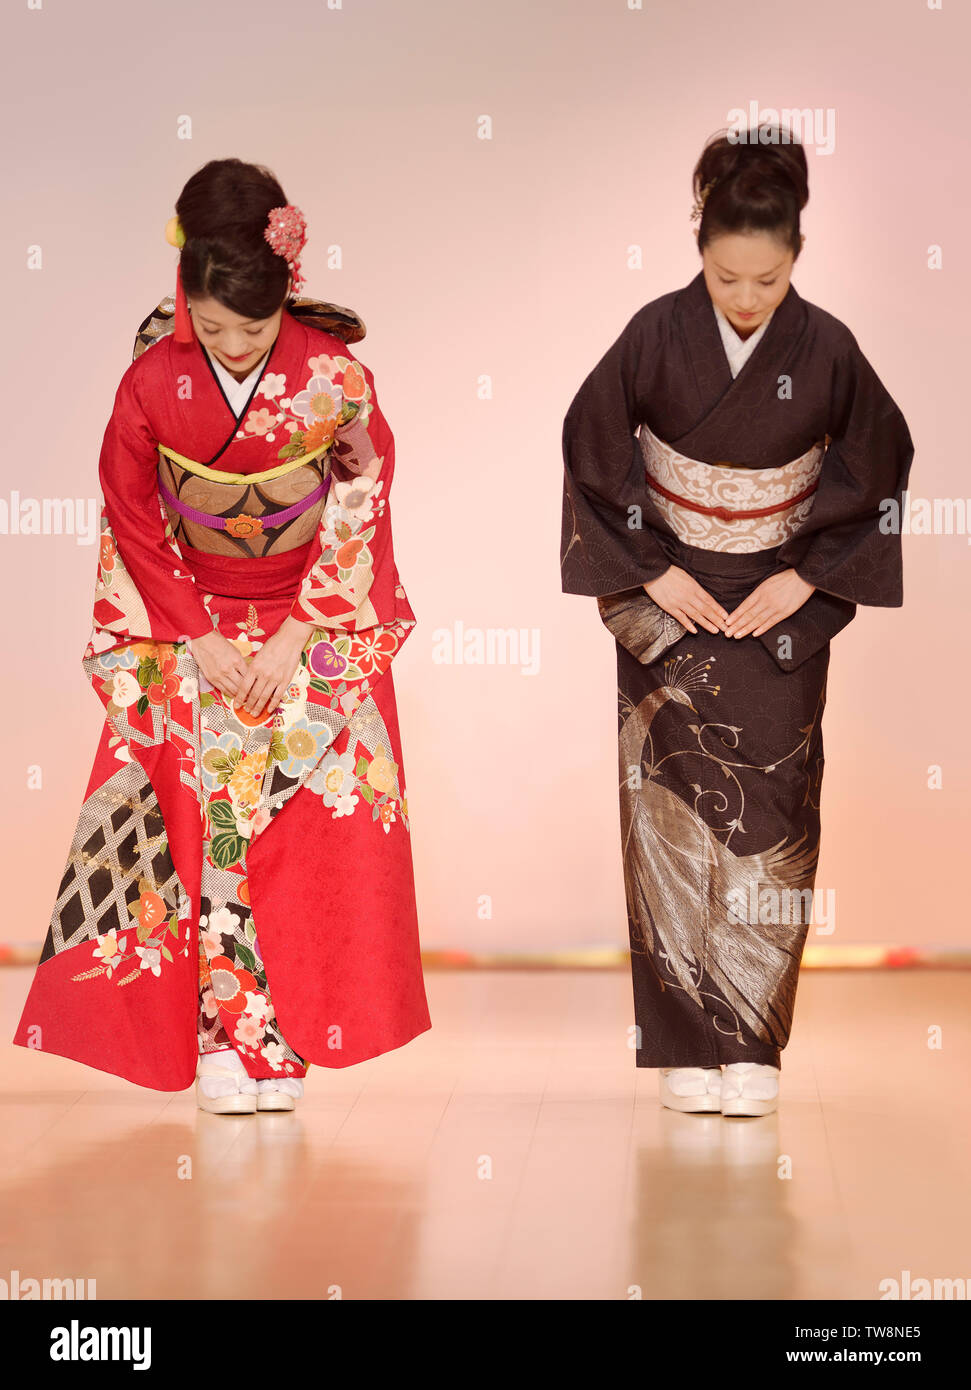 License available at MaximImages.com - Japanese women in elegant red and black kimono bowing at a fashion show in Kyoto, Japan. Stock Photo